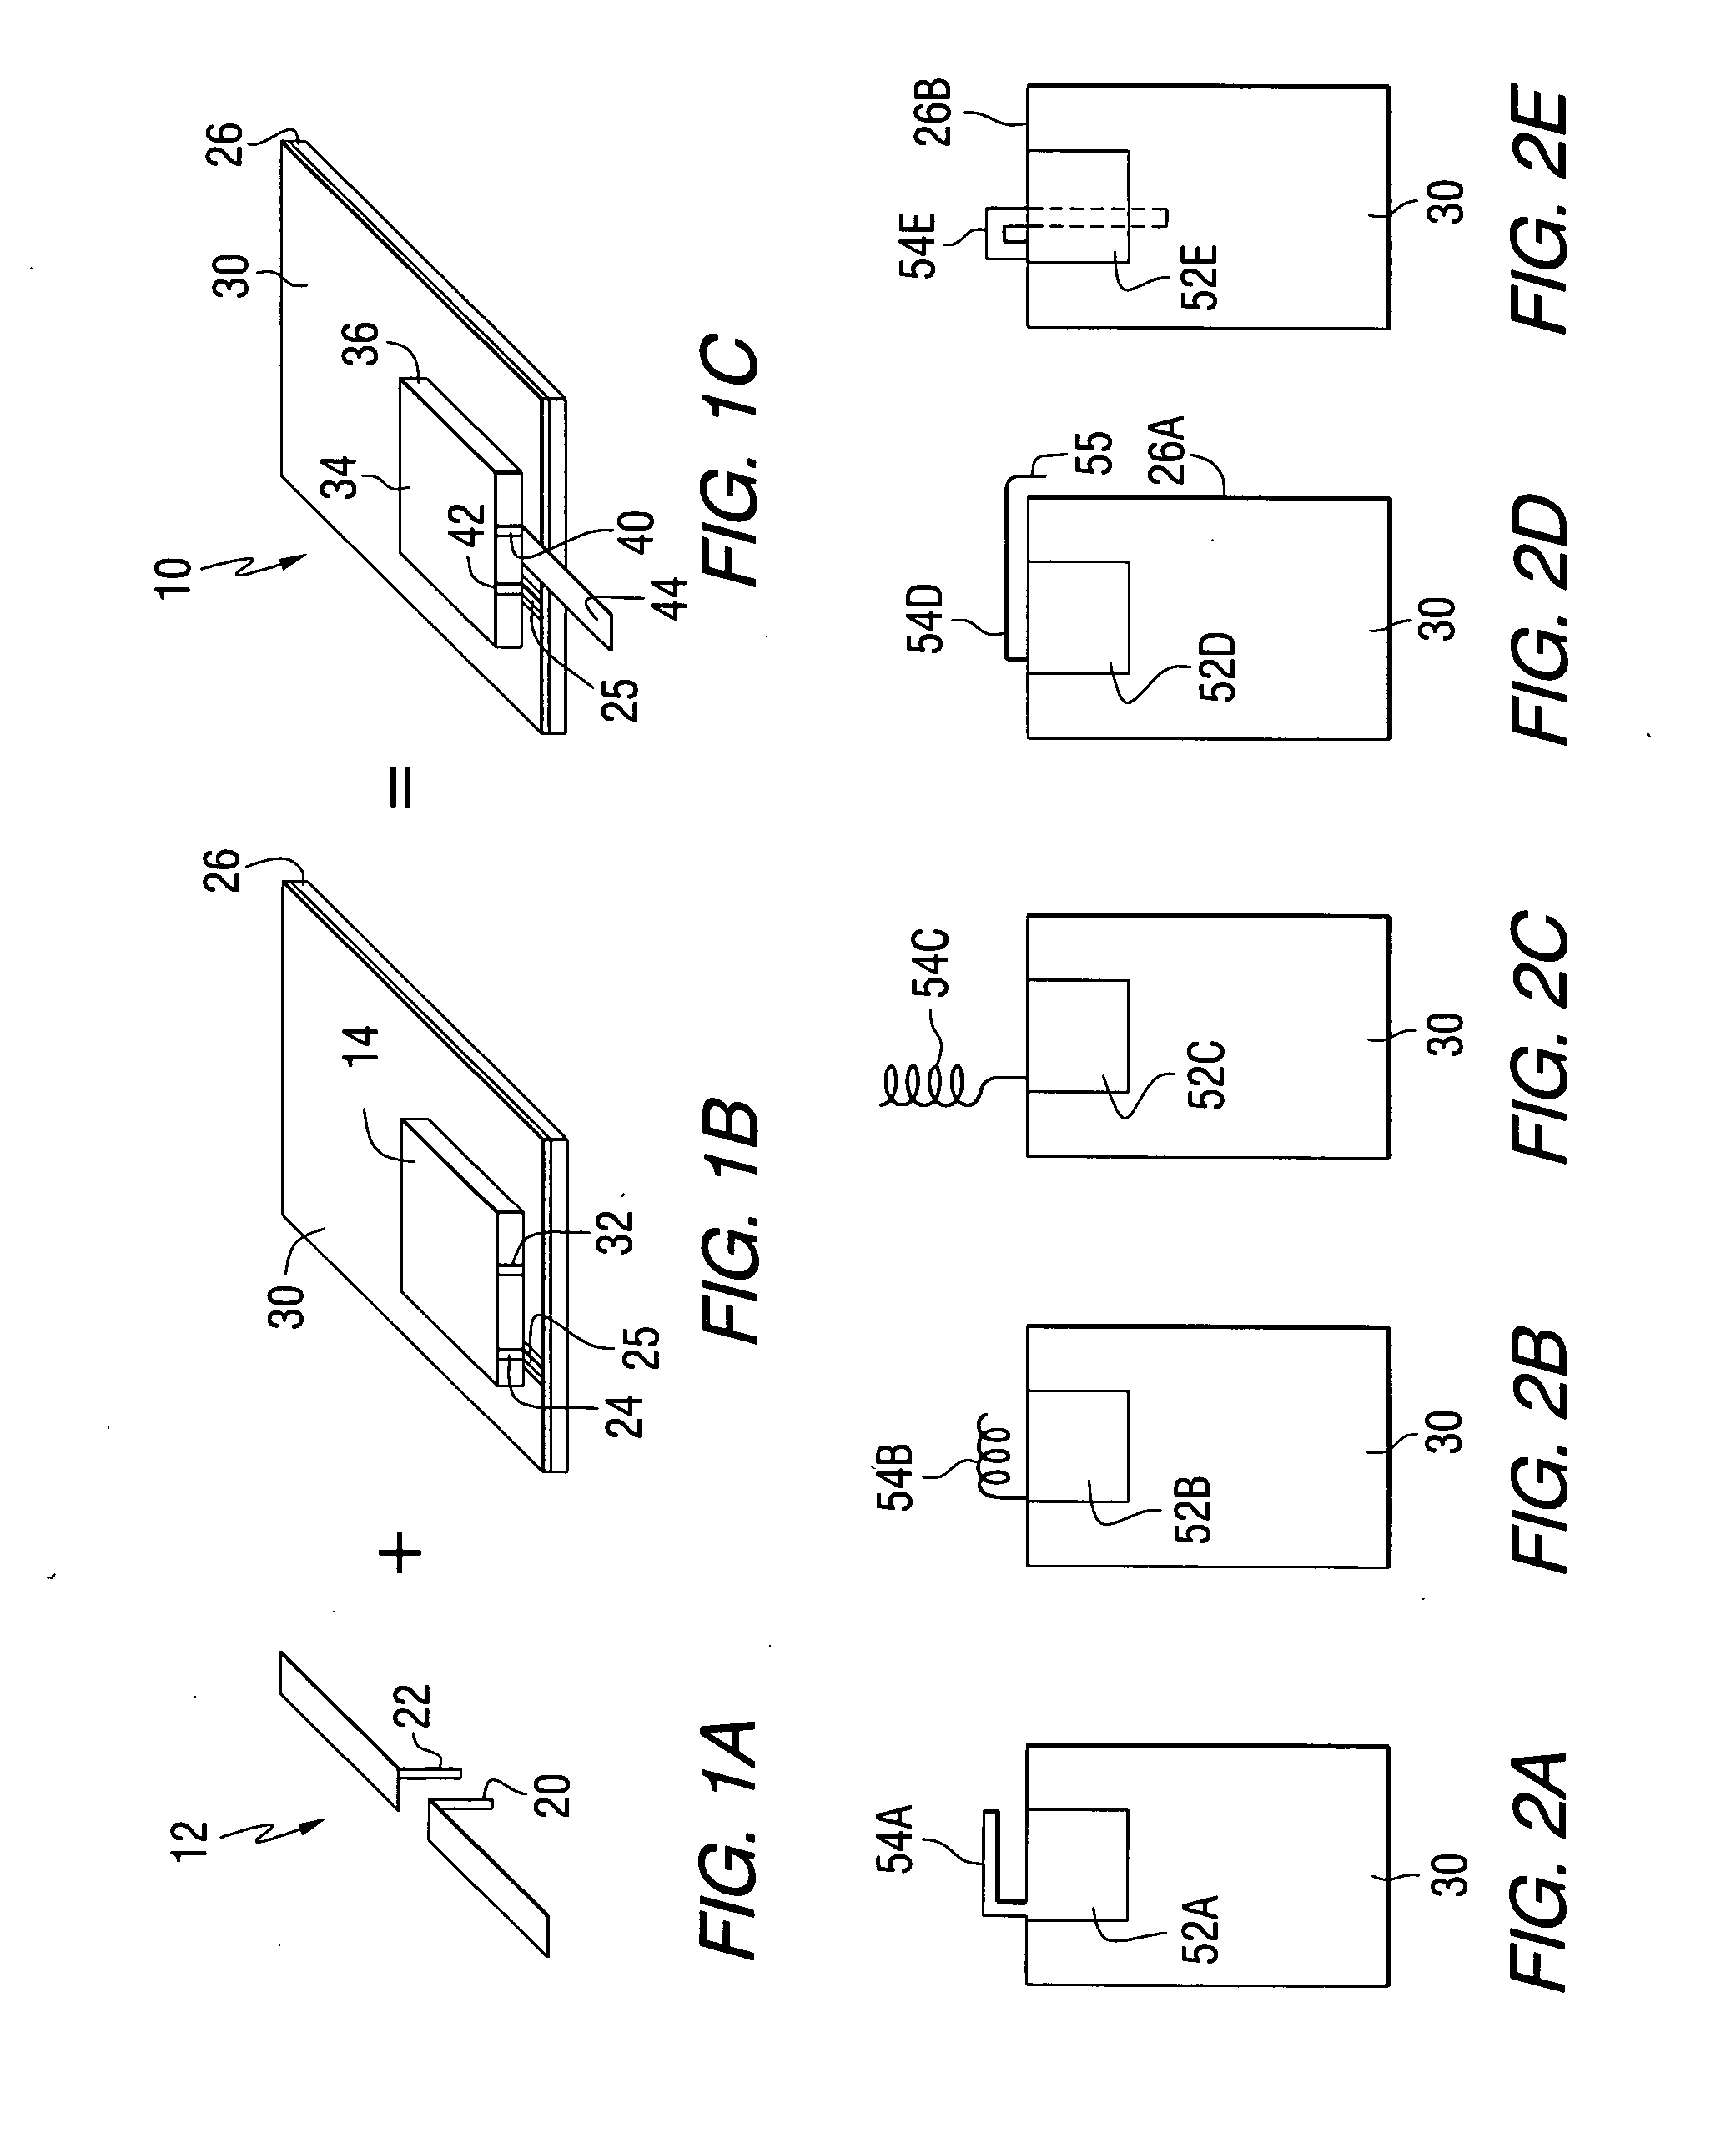 Compact dual band antenna having common elements and common feed